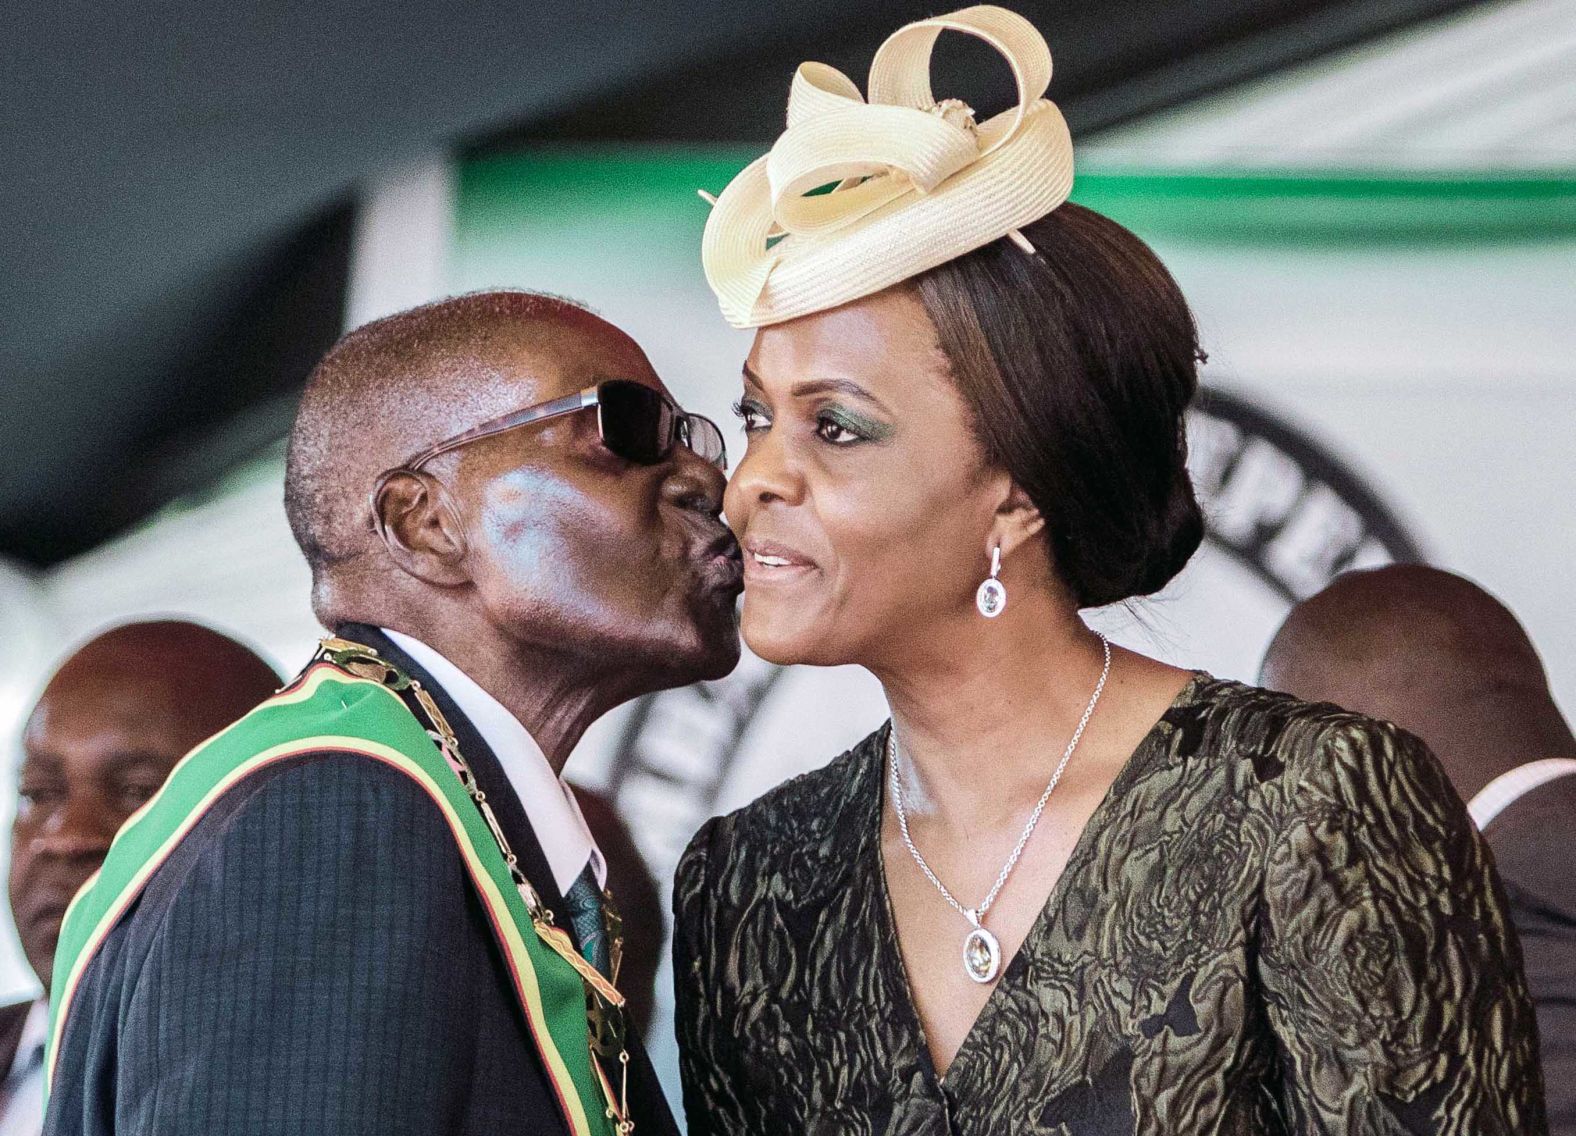 Mugabe kisses his wife during Independence Day celebrations in April 2017. In early November, the<a href="index.php?page=&url=http%3A%2F%2Fedition.cnn.com%2F2017%2F11%2F07%2Fafrica%2Fzimbabwe-mugabe-vice-president-mnangagwa%2Findex.html" target="_blank"> sacking of Mugabe's longtime ally and vice president, Emmerson Mnangagwa,</a> was seen as a move to potentially clear the way for Grace Mugabe to succeed her 93-year-old husband.